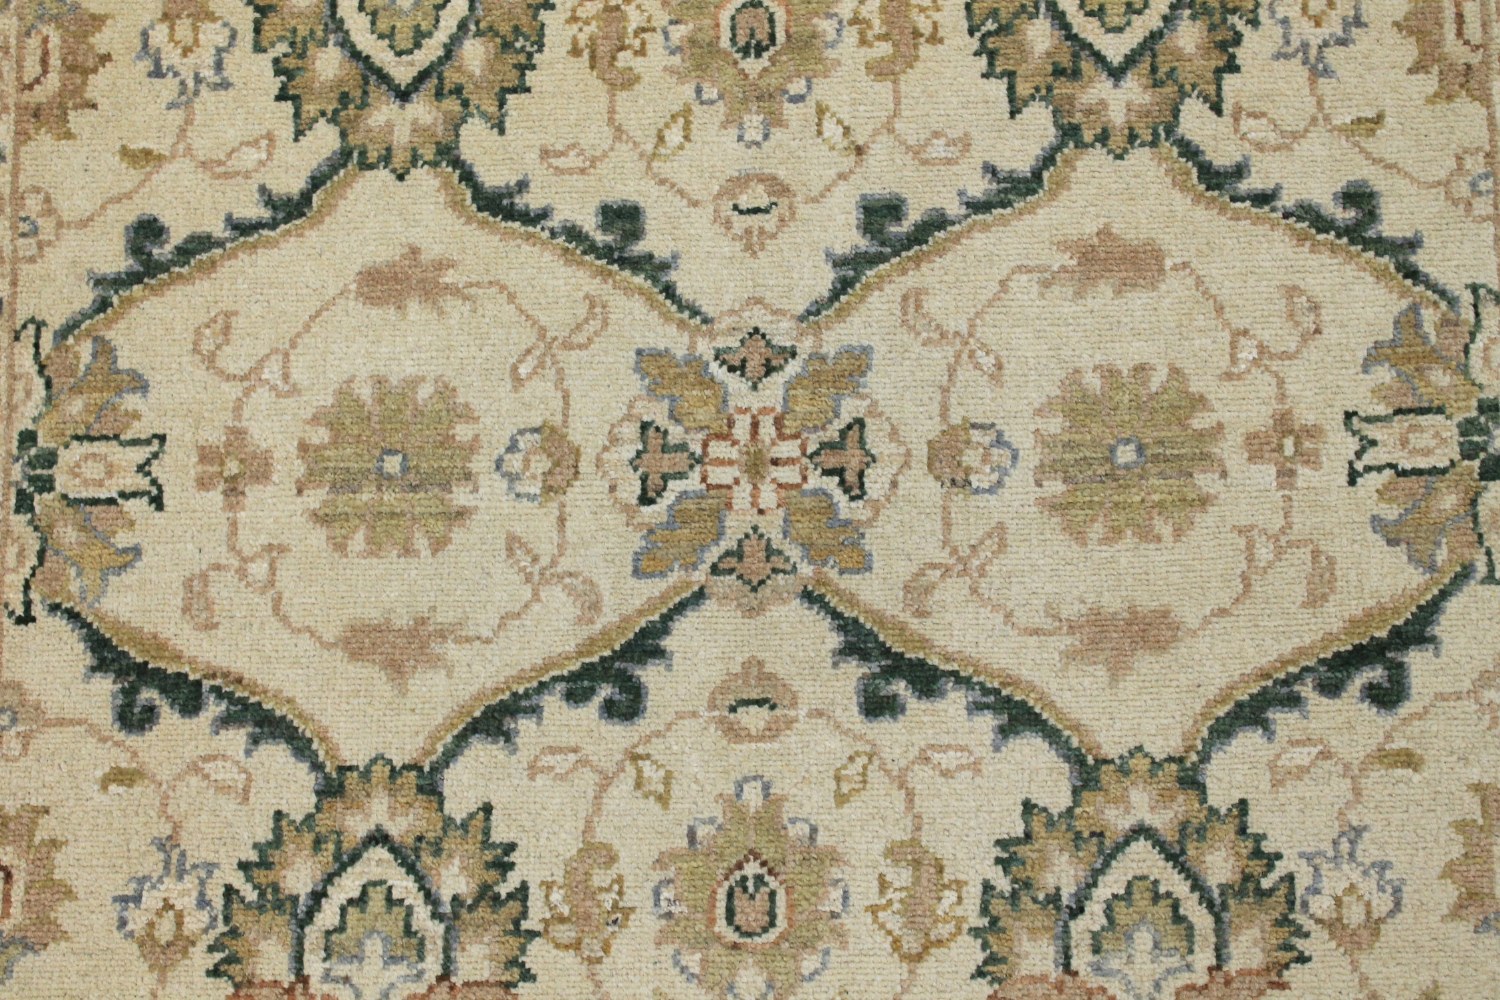 4x6 Peshawar Hand Knotted Wool Area Rug - MR12389